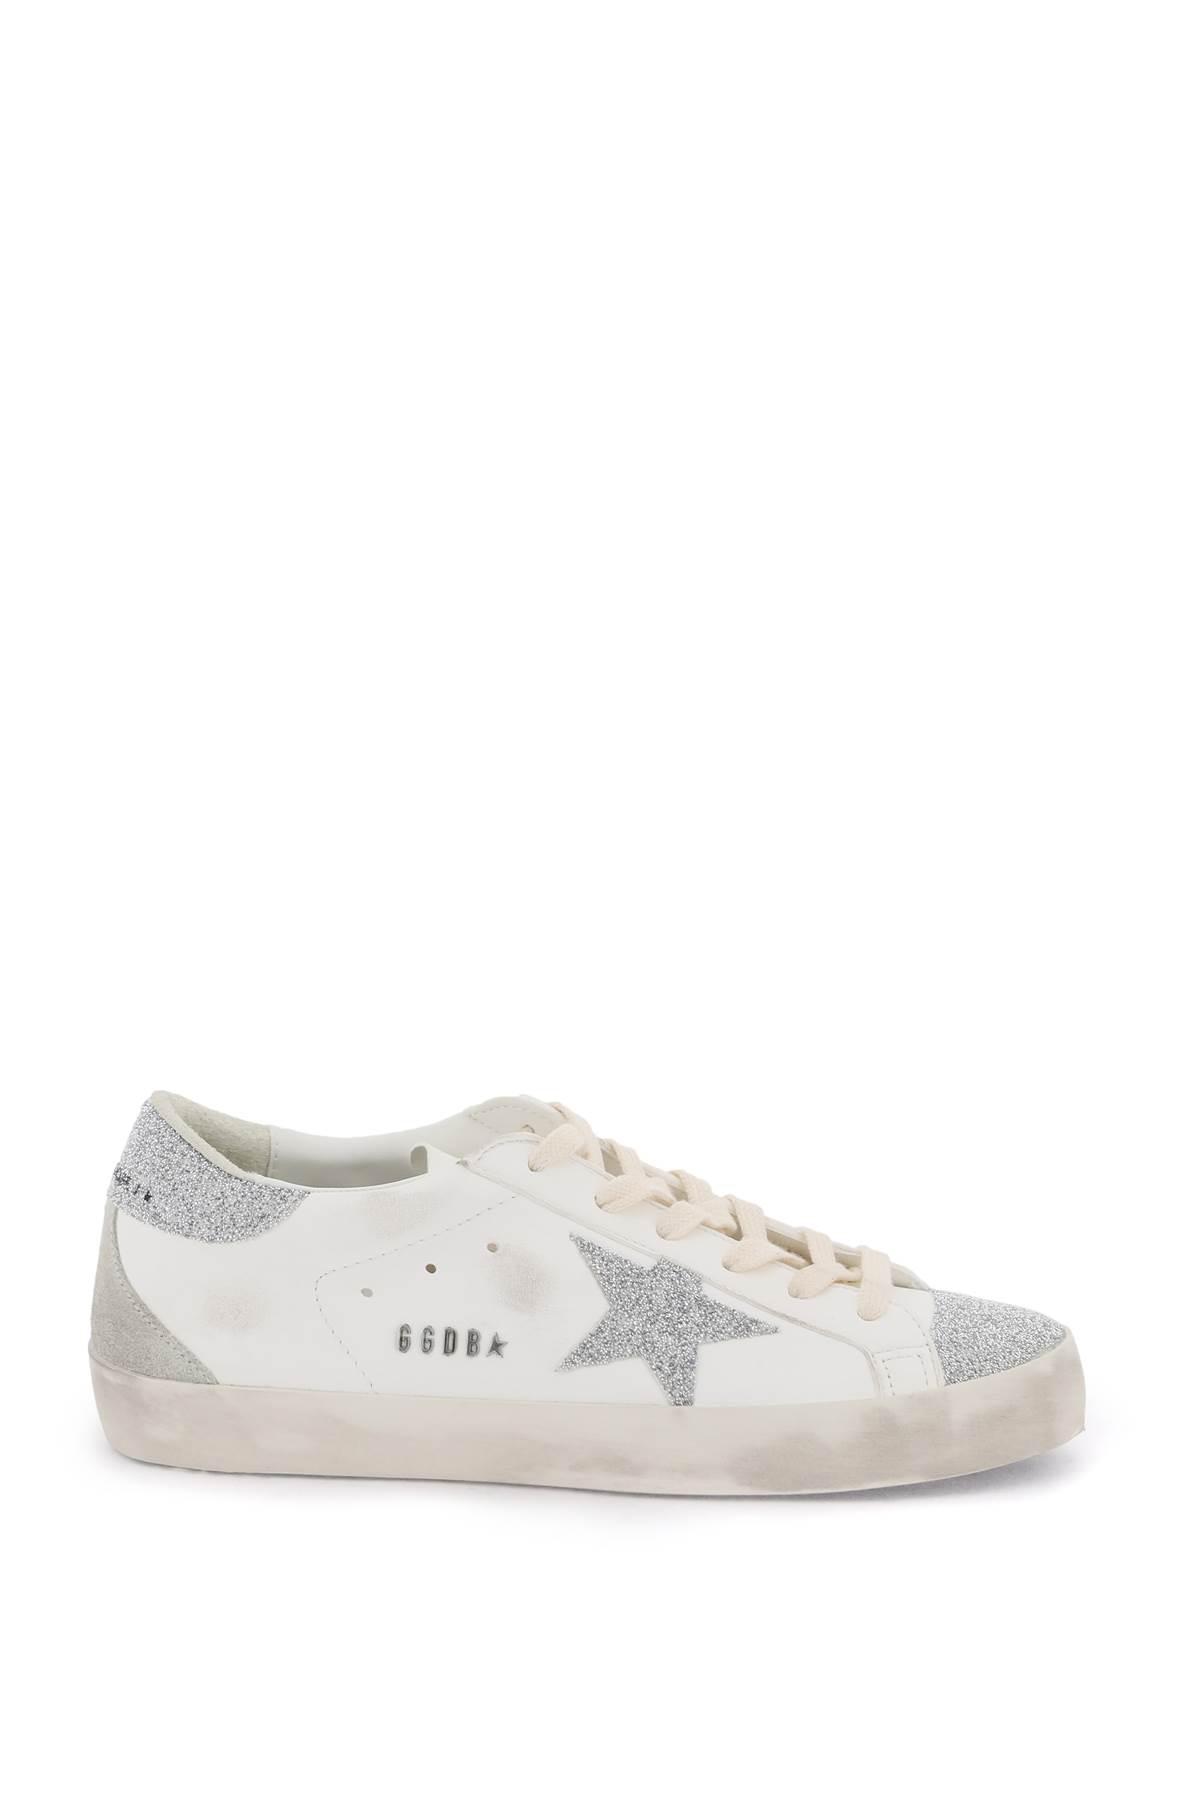 GOLDEN GOOSE SUPER-STAR SNEAKERS WITH GLITTER